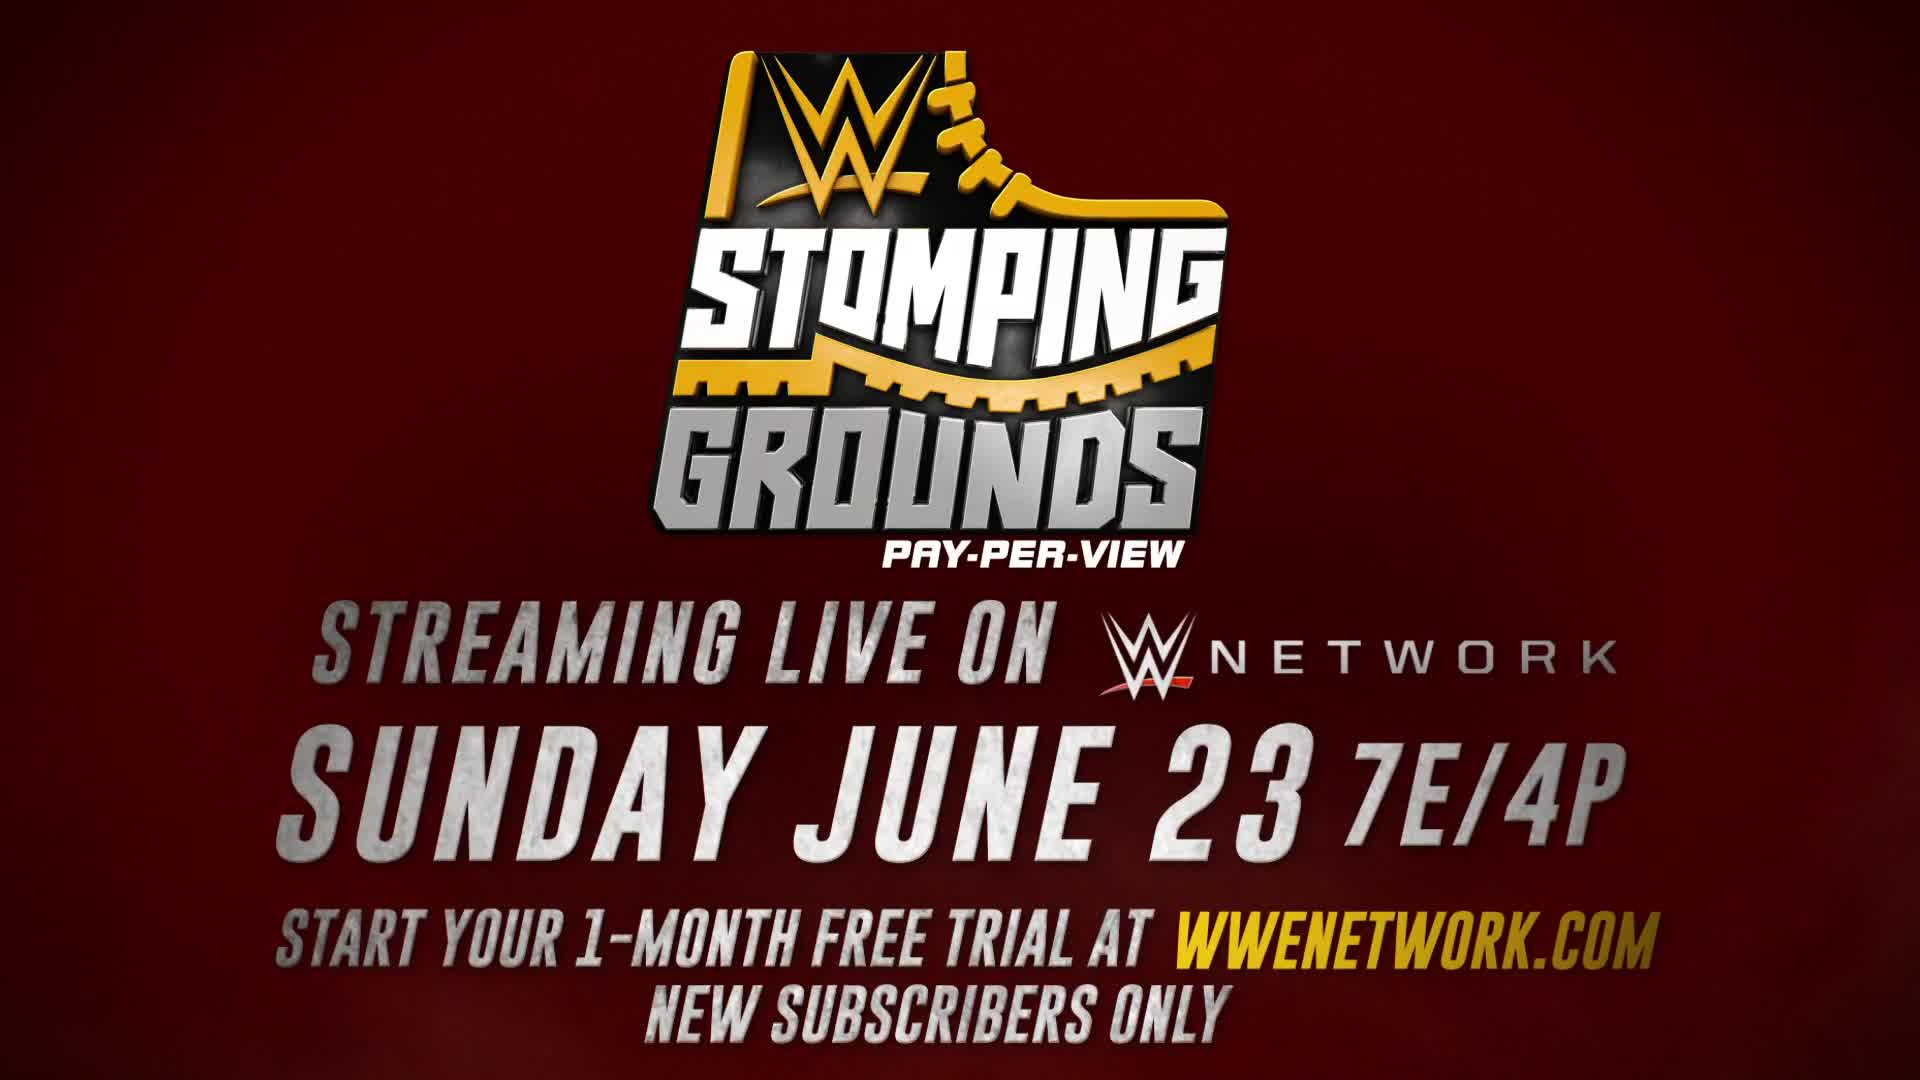 WWE Stomping Grounds Where to Watch